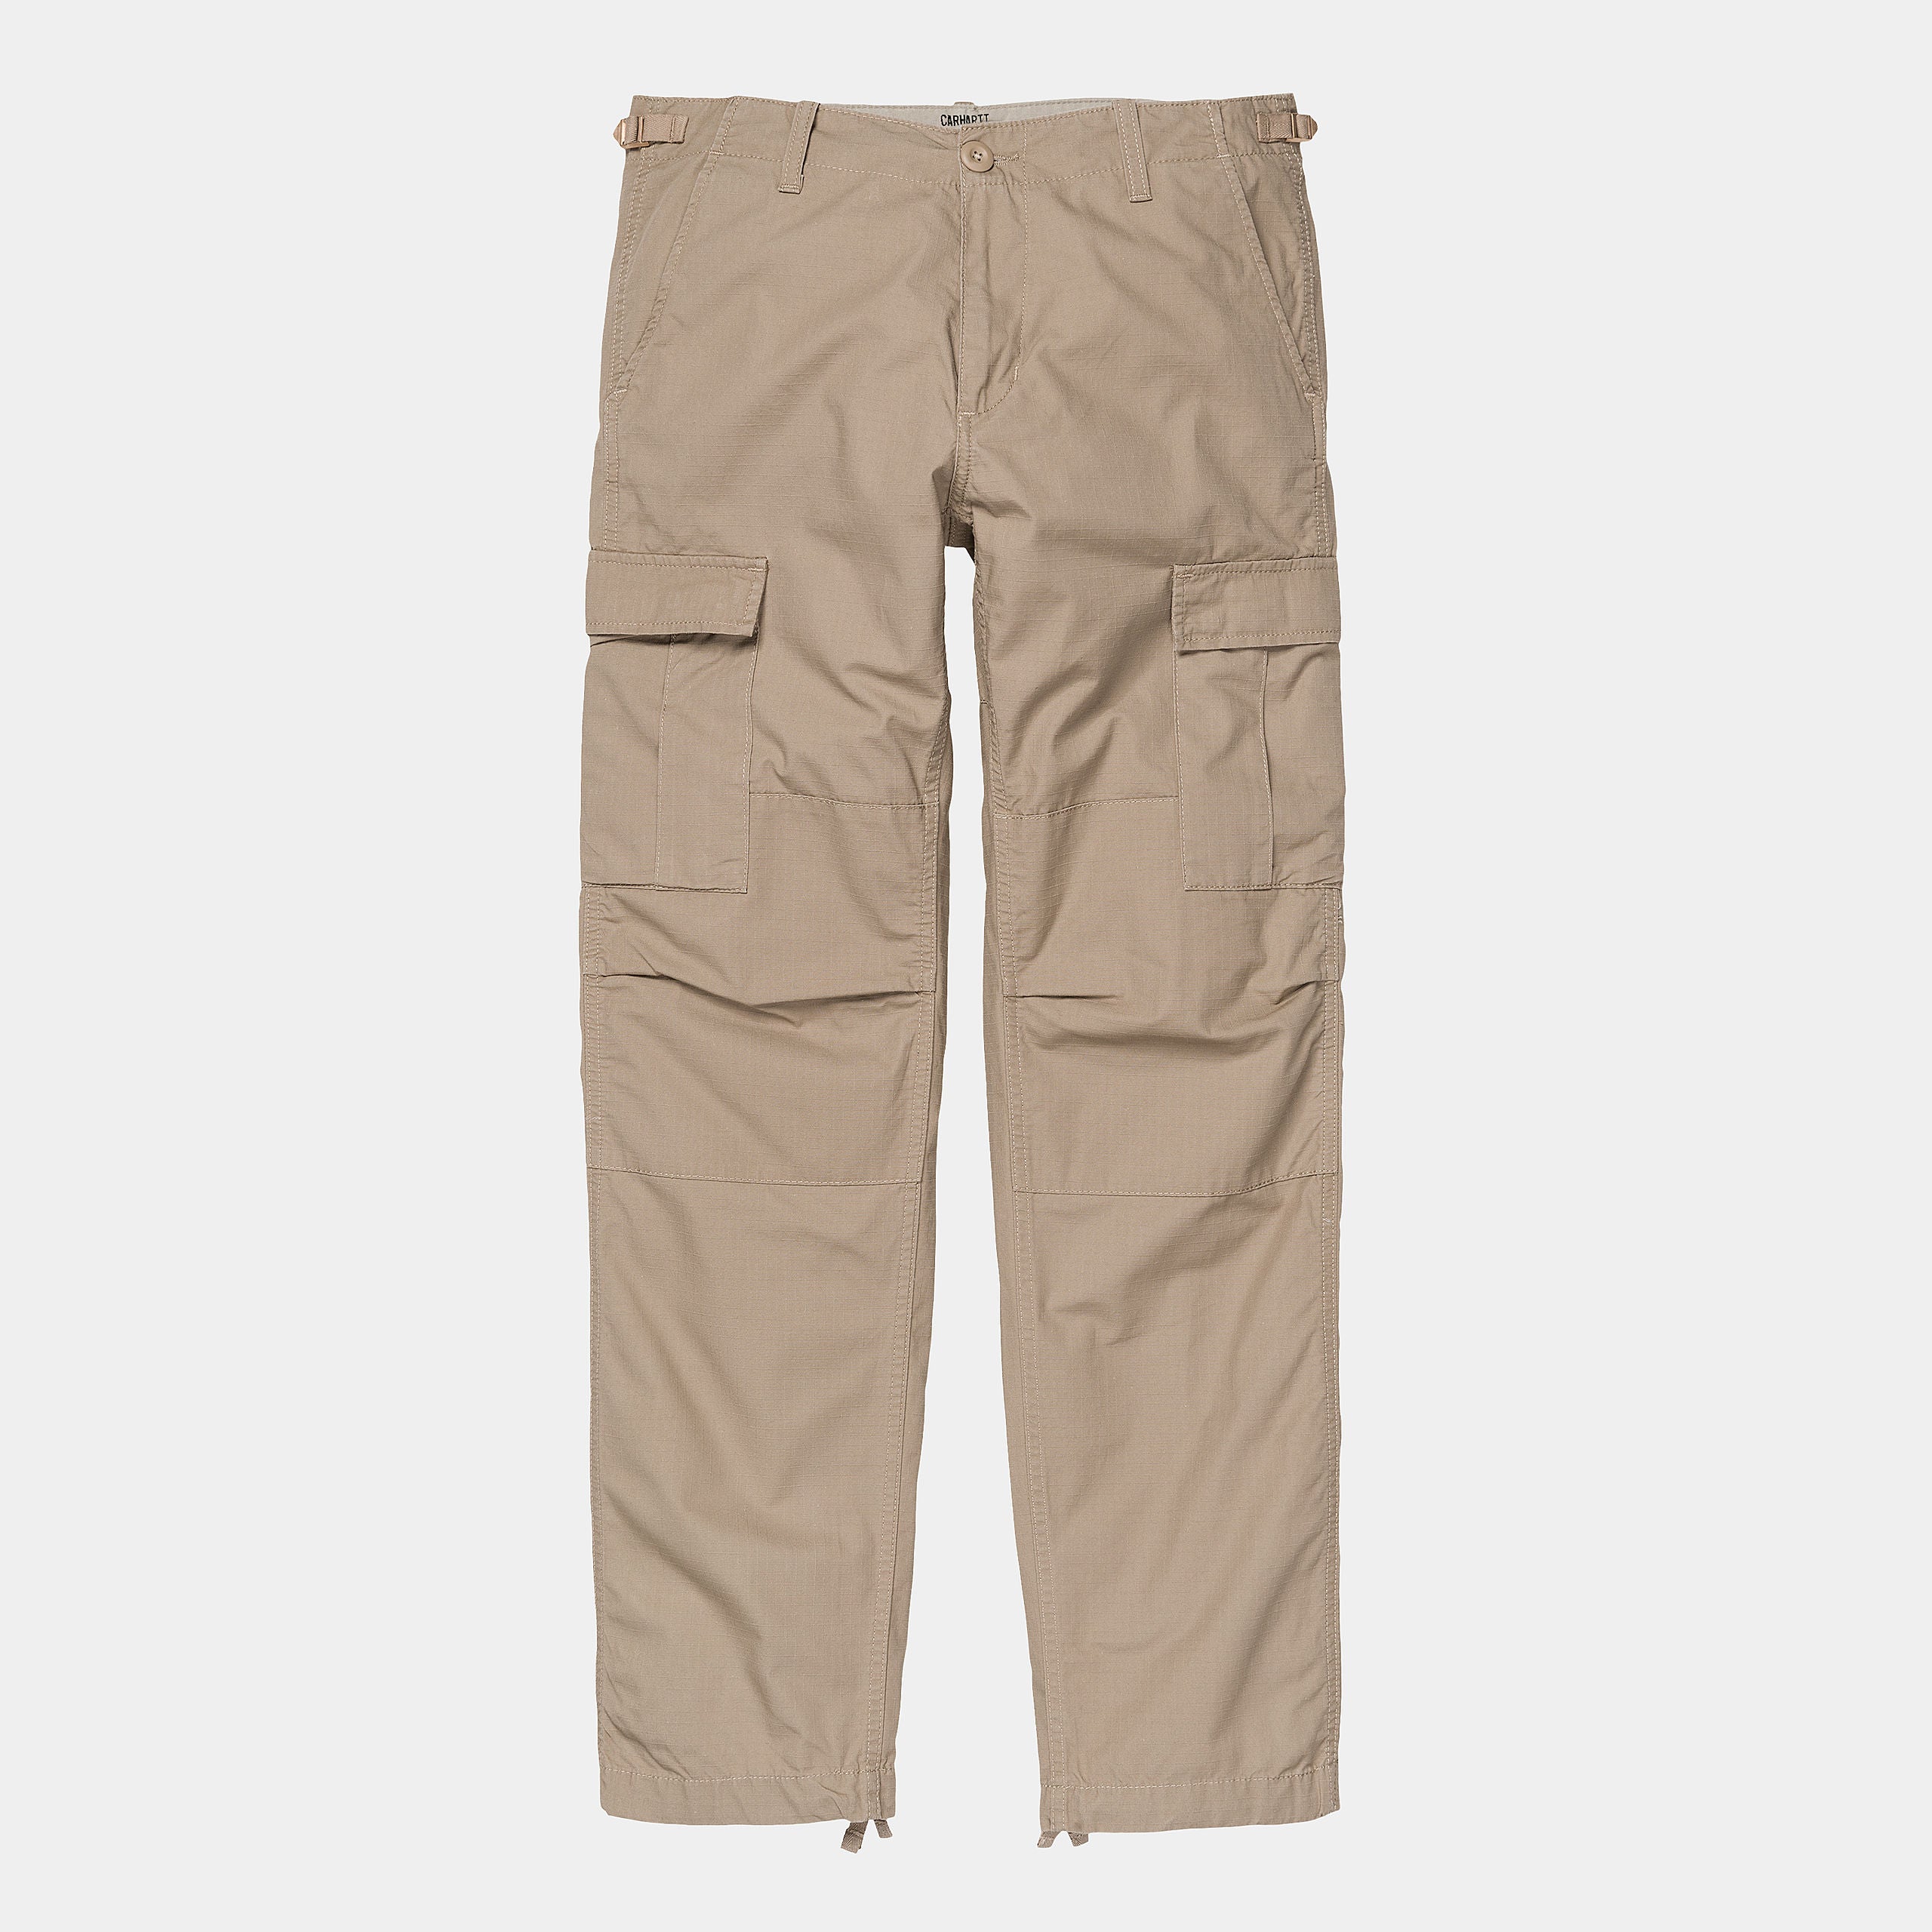 Carhartt Mens Aviation Pant - Leather Rinsed